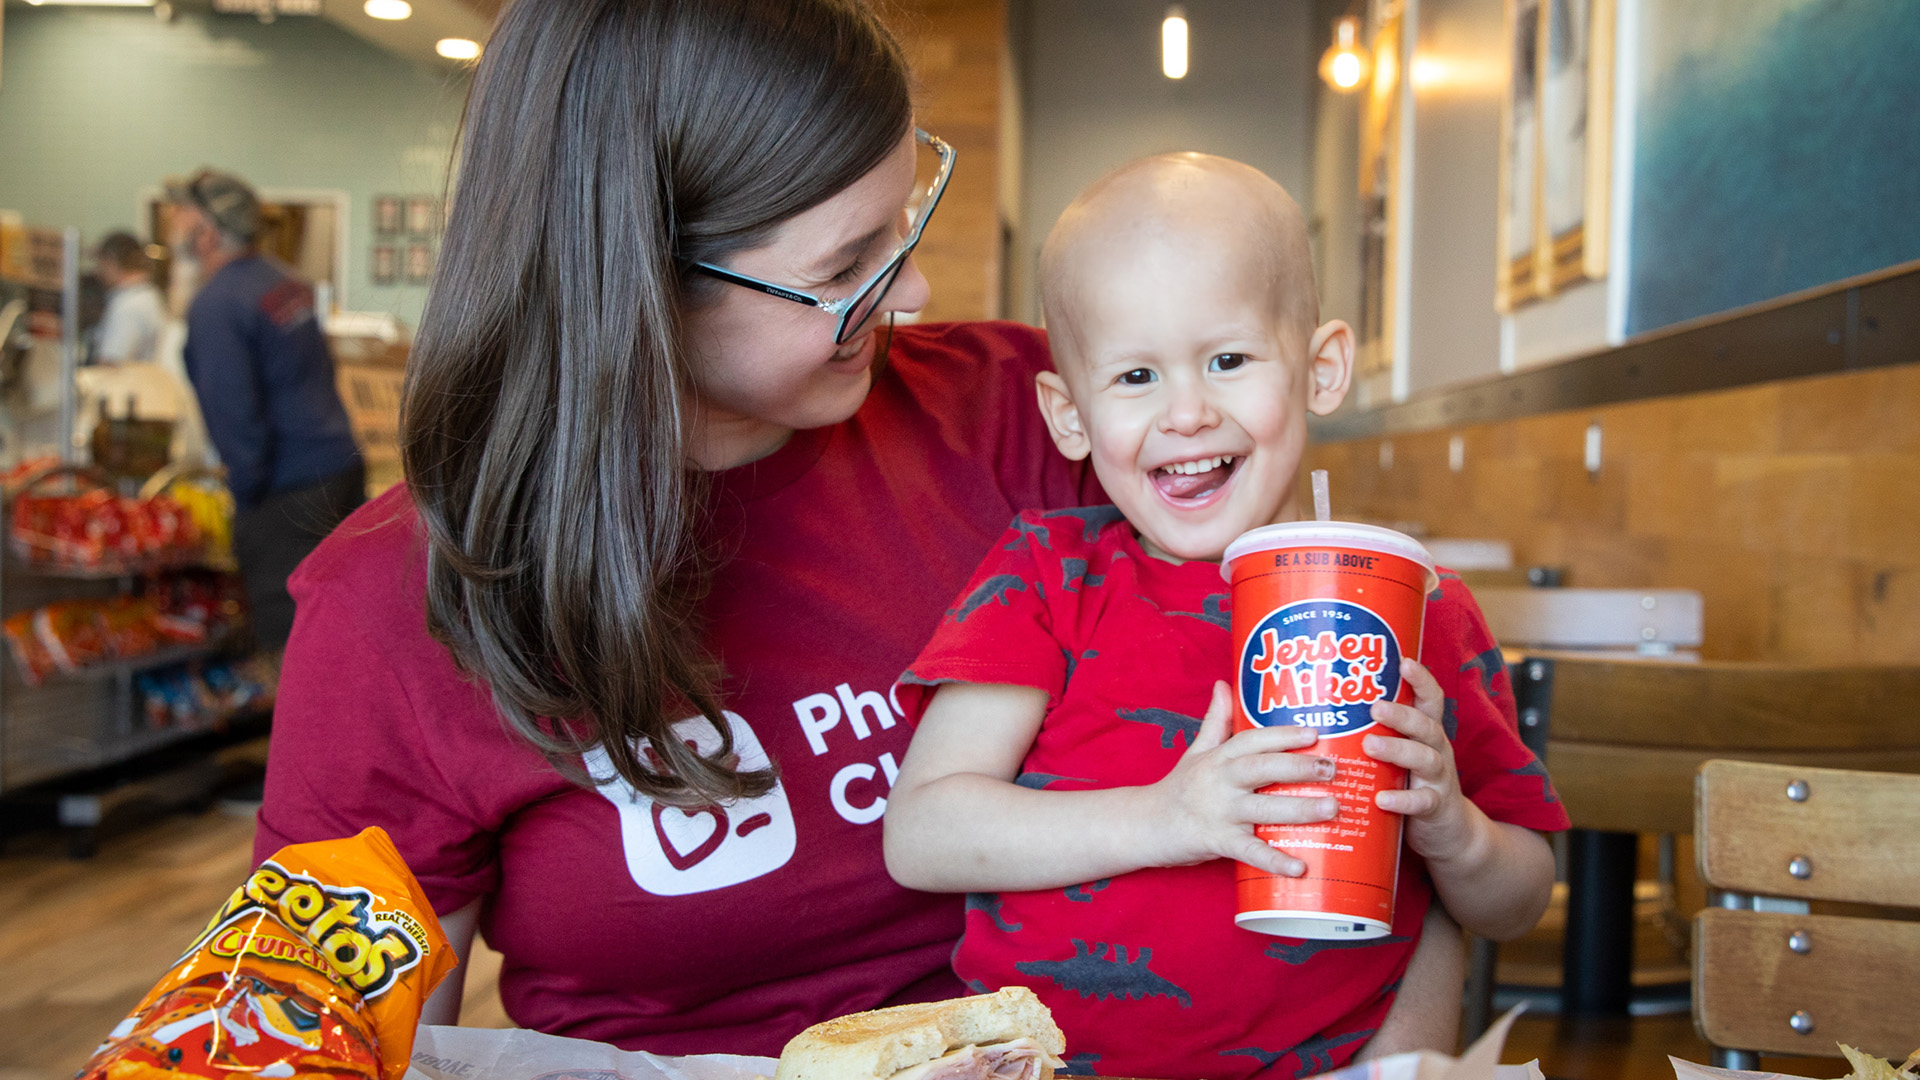 A mom and her little boy with cancer enjoy a meal together at Jersey Mike's